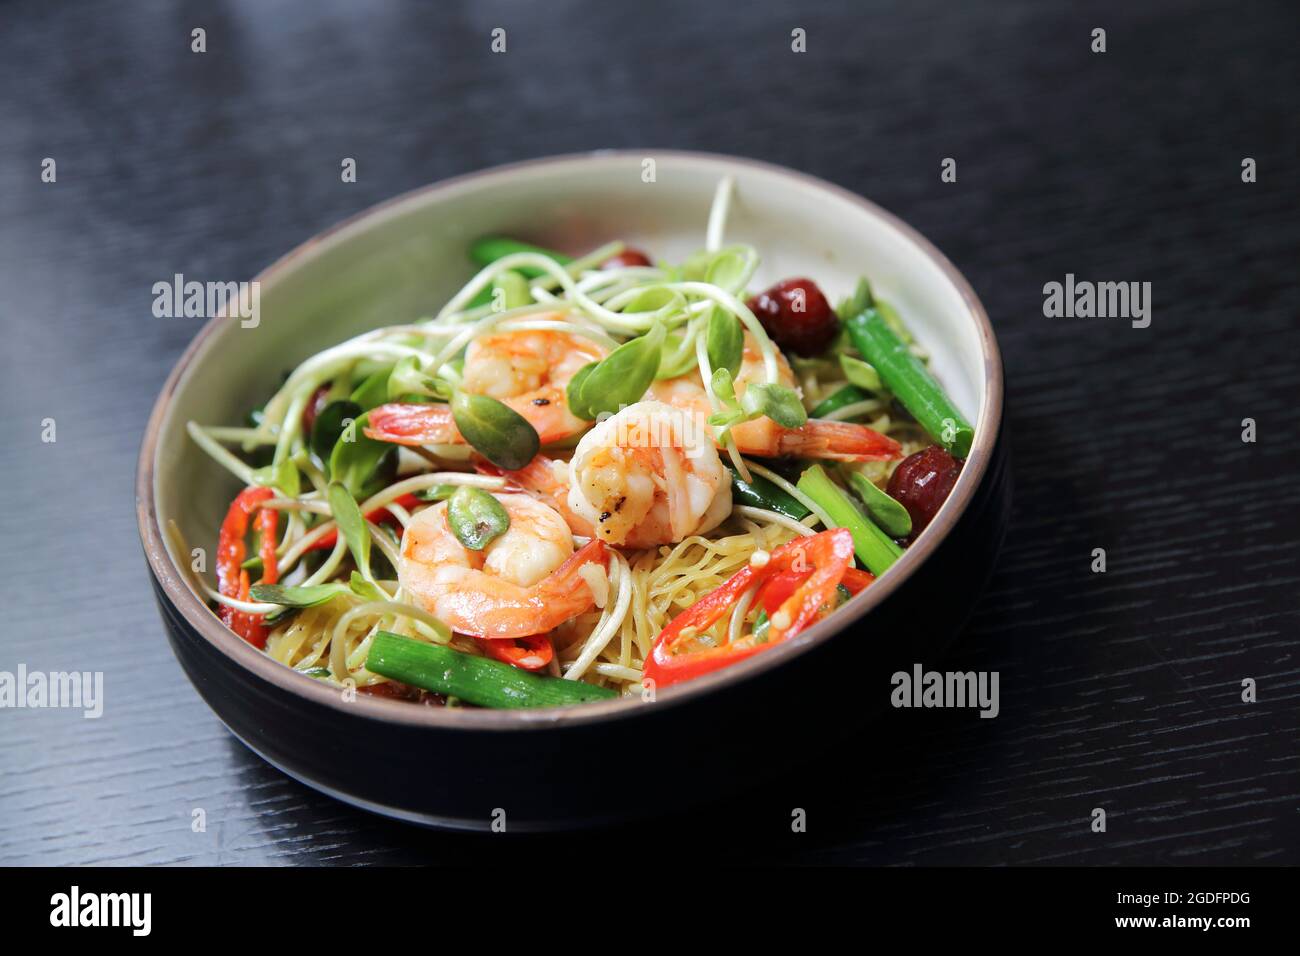 Chinese food shrimp and green vegetable with noodles Stock Photo